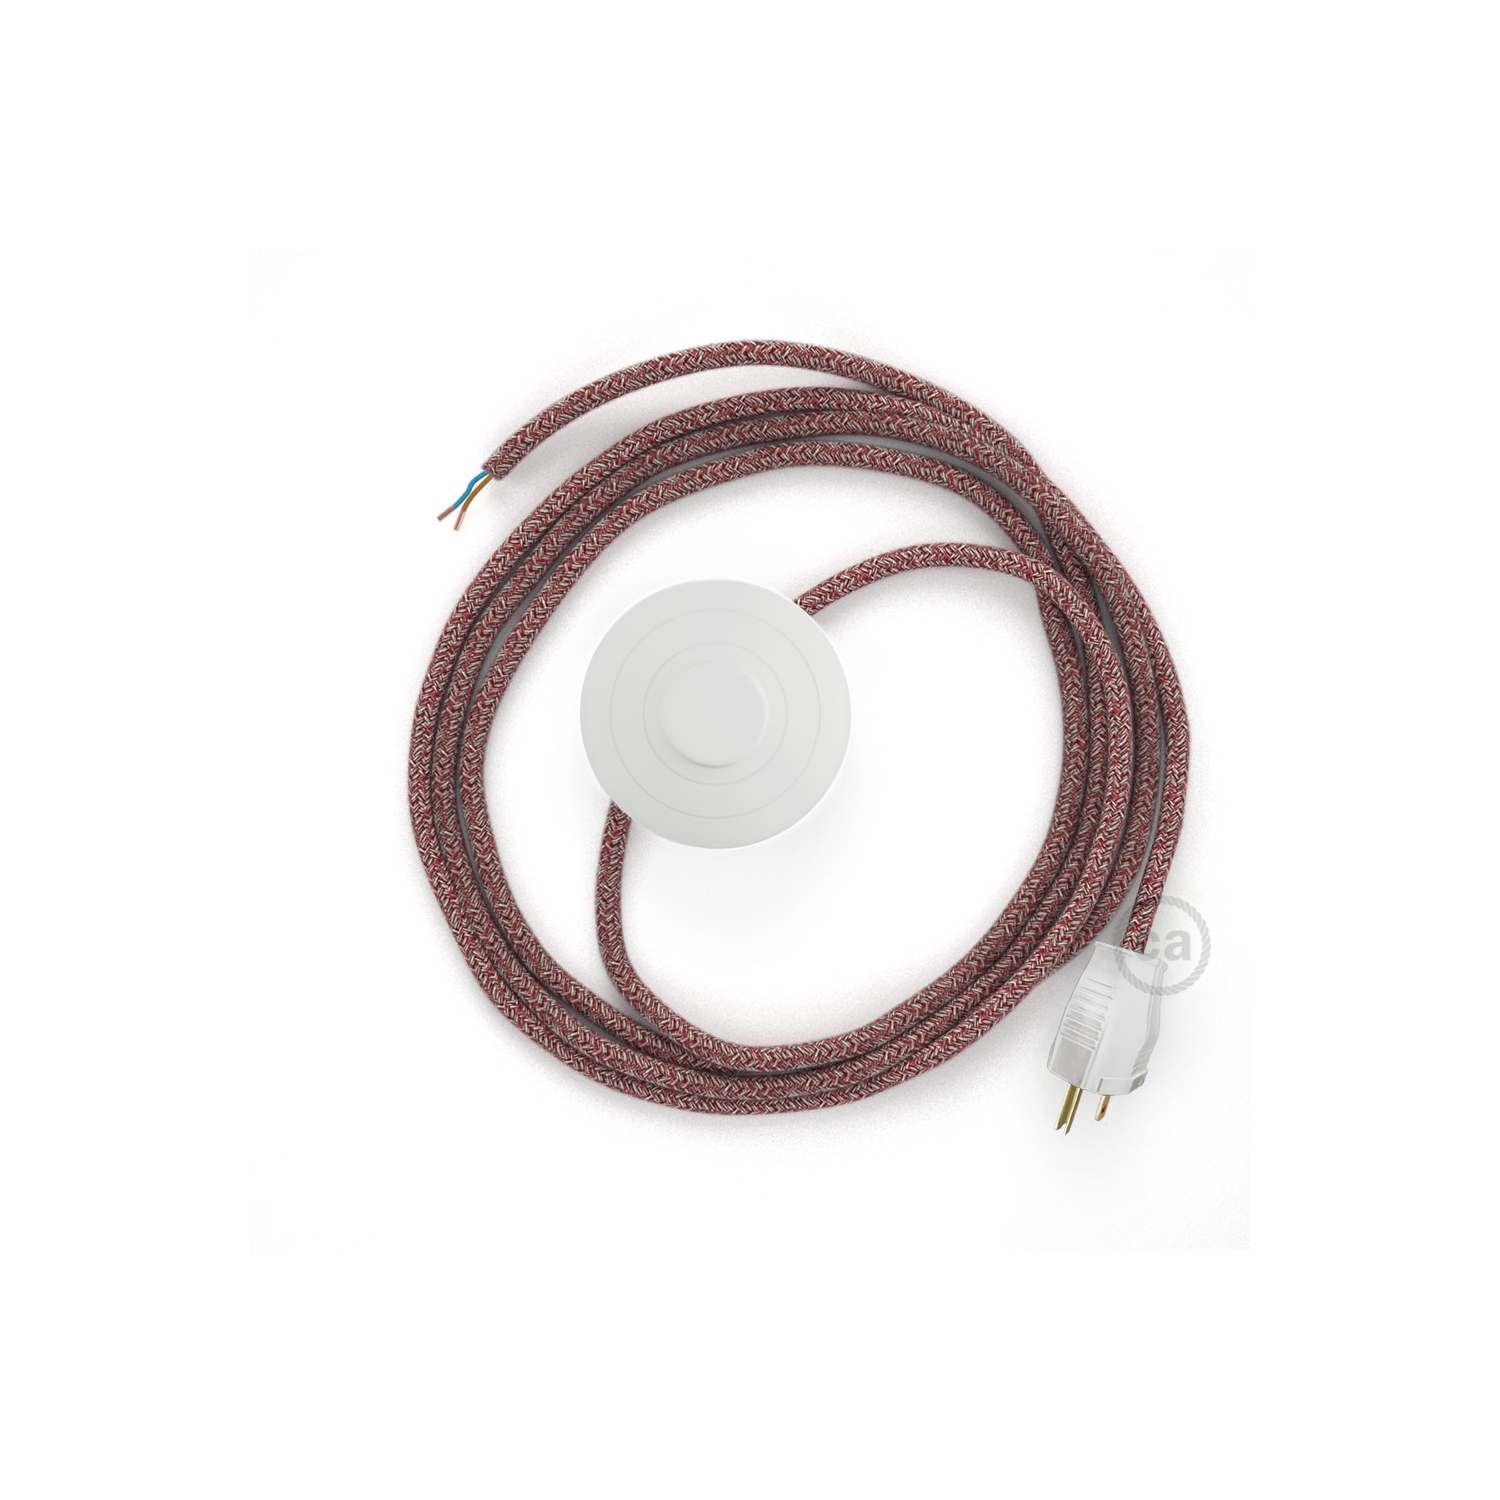 Power Cord with foot switch, RS83 Red Glitter Cotton & Natural Linen Tweed - Choose color of switch/plug